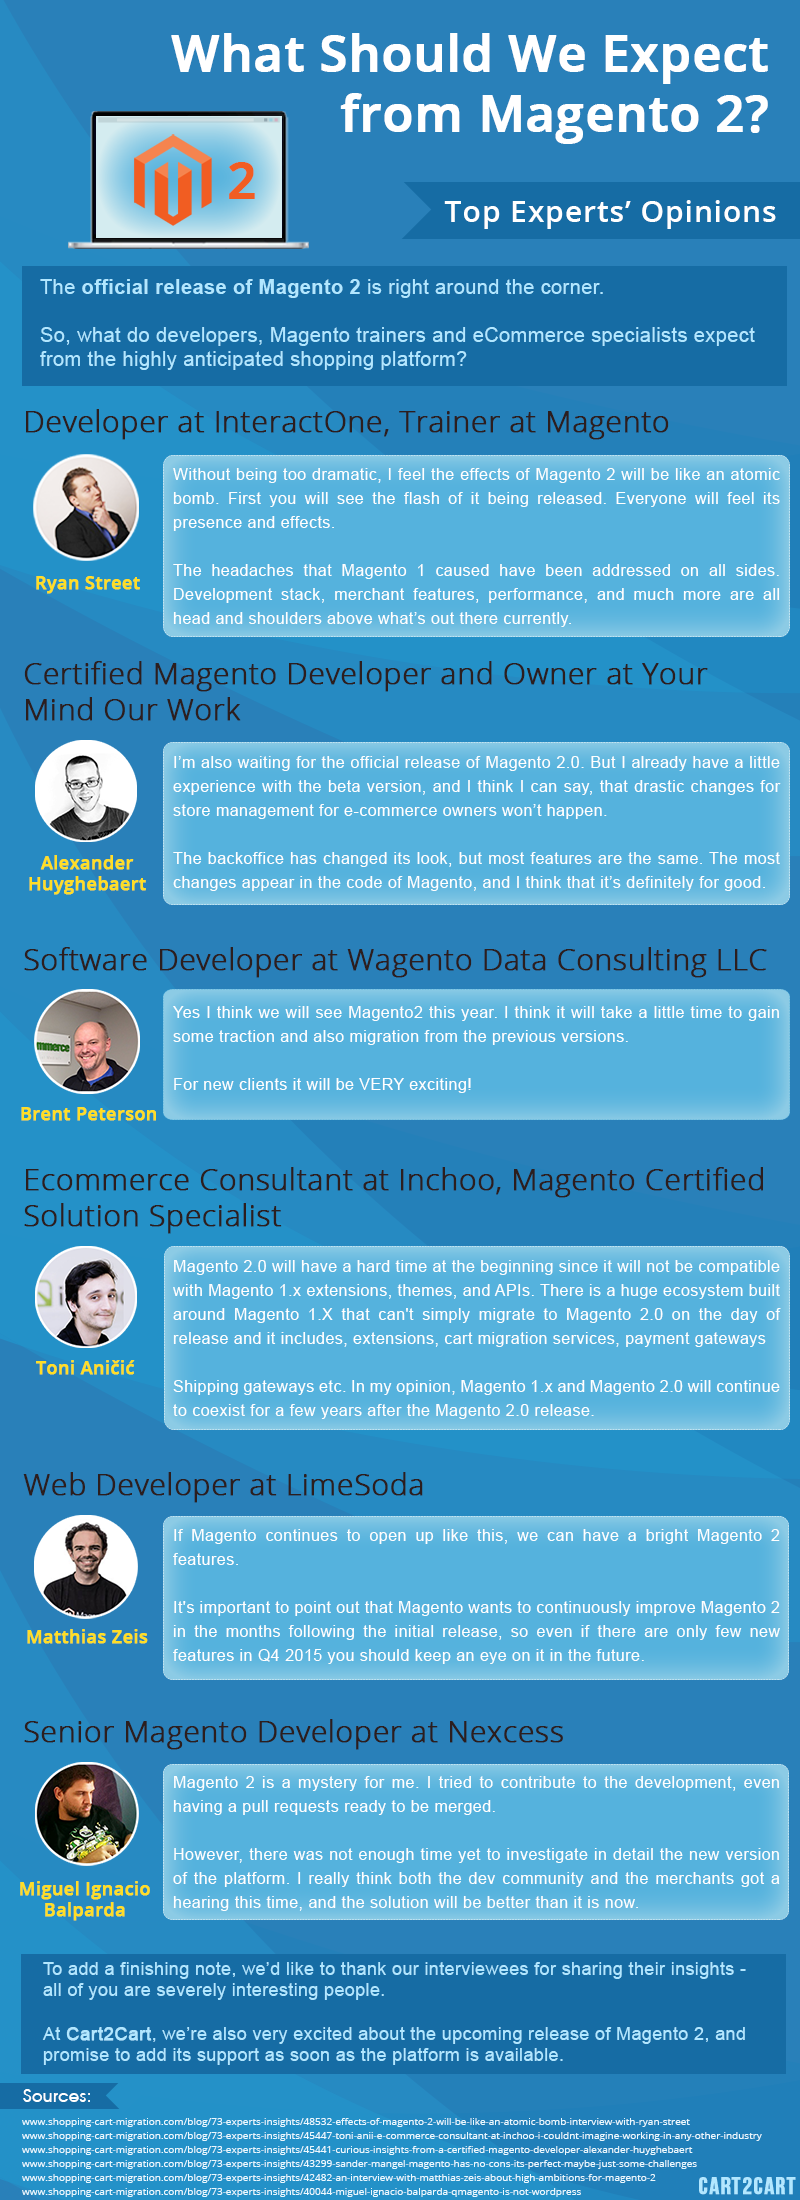 What Experts Think of Magento 2 [Infographic]